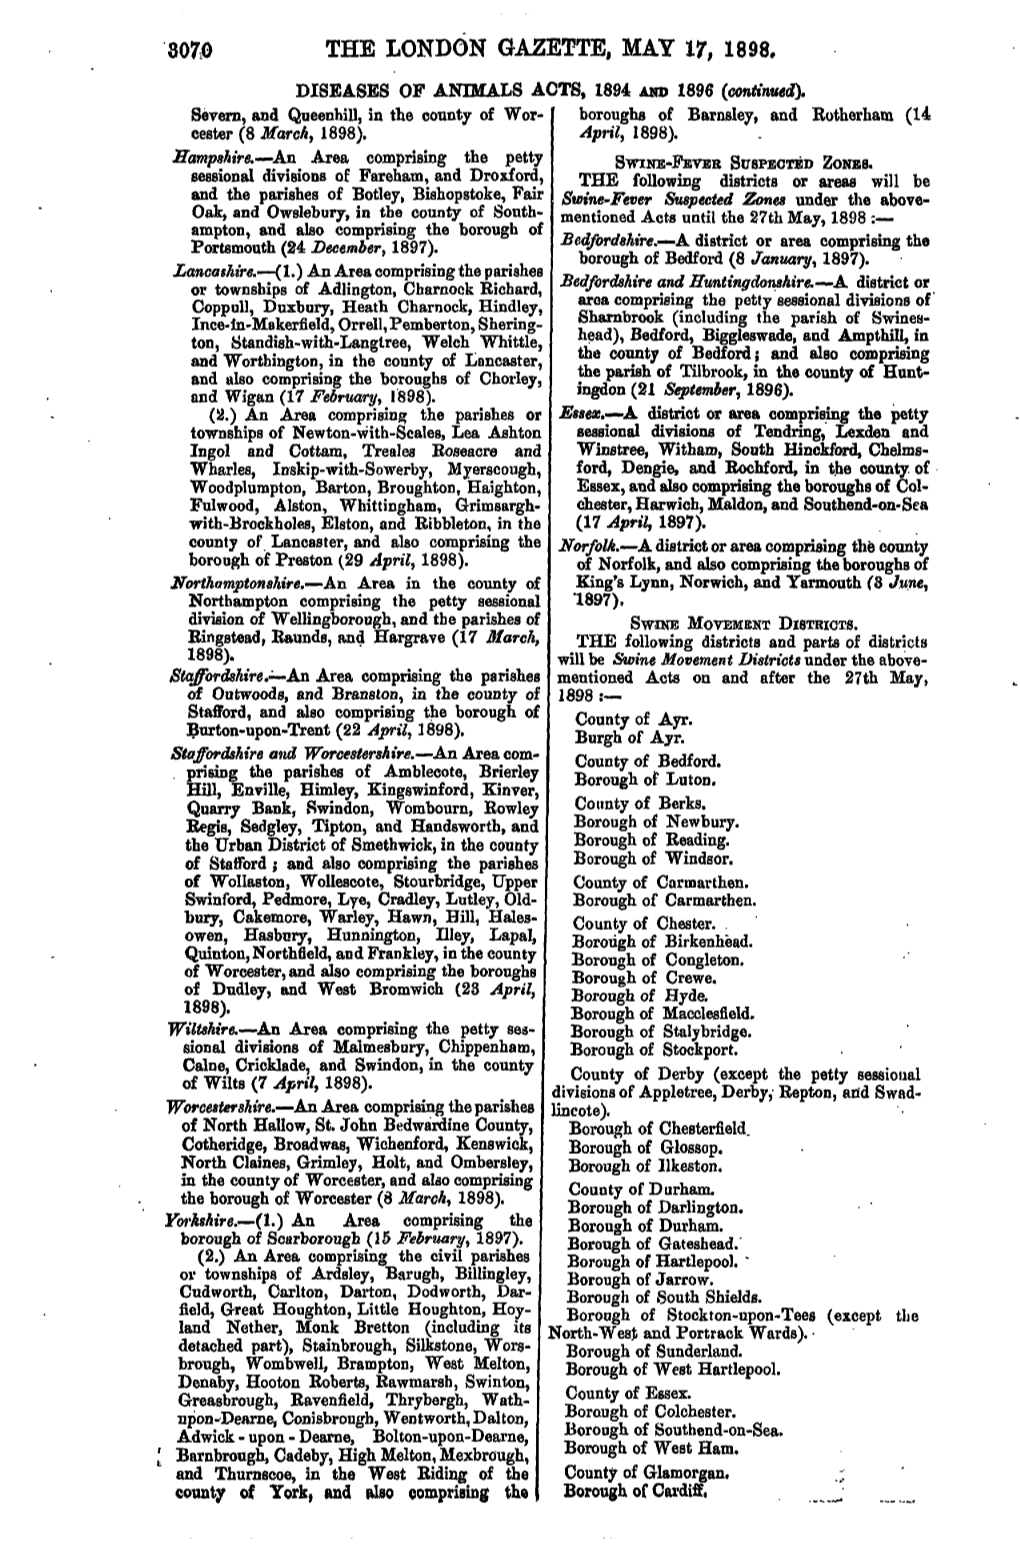 80*0 the LONDON GAZETTE, MAY 17, 1898, DISEASES of ANIMALS ACTS, 1894 and 1896 (Continued}